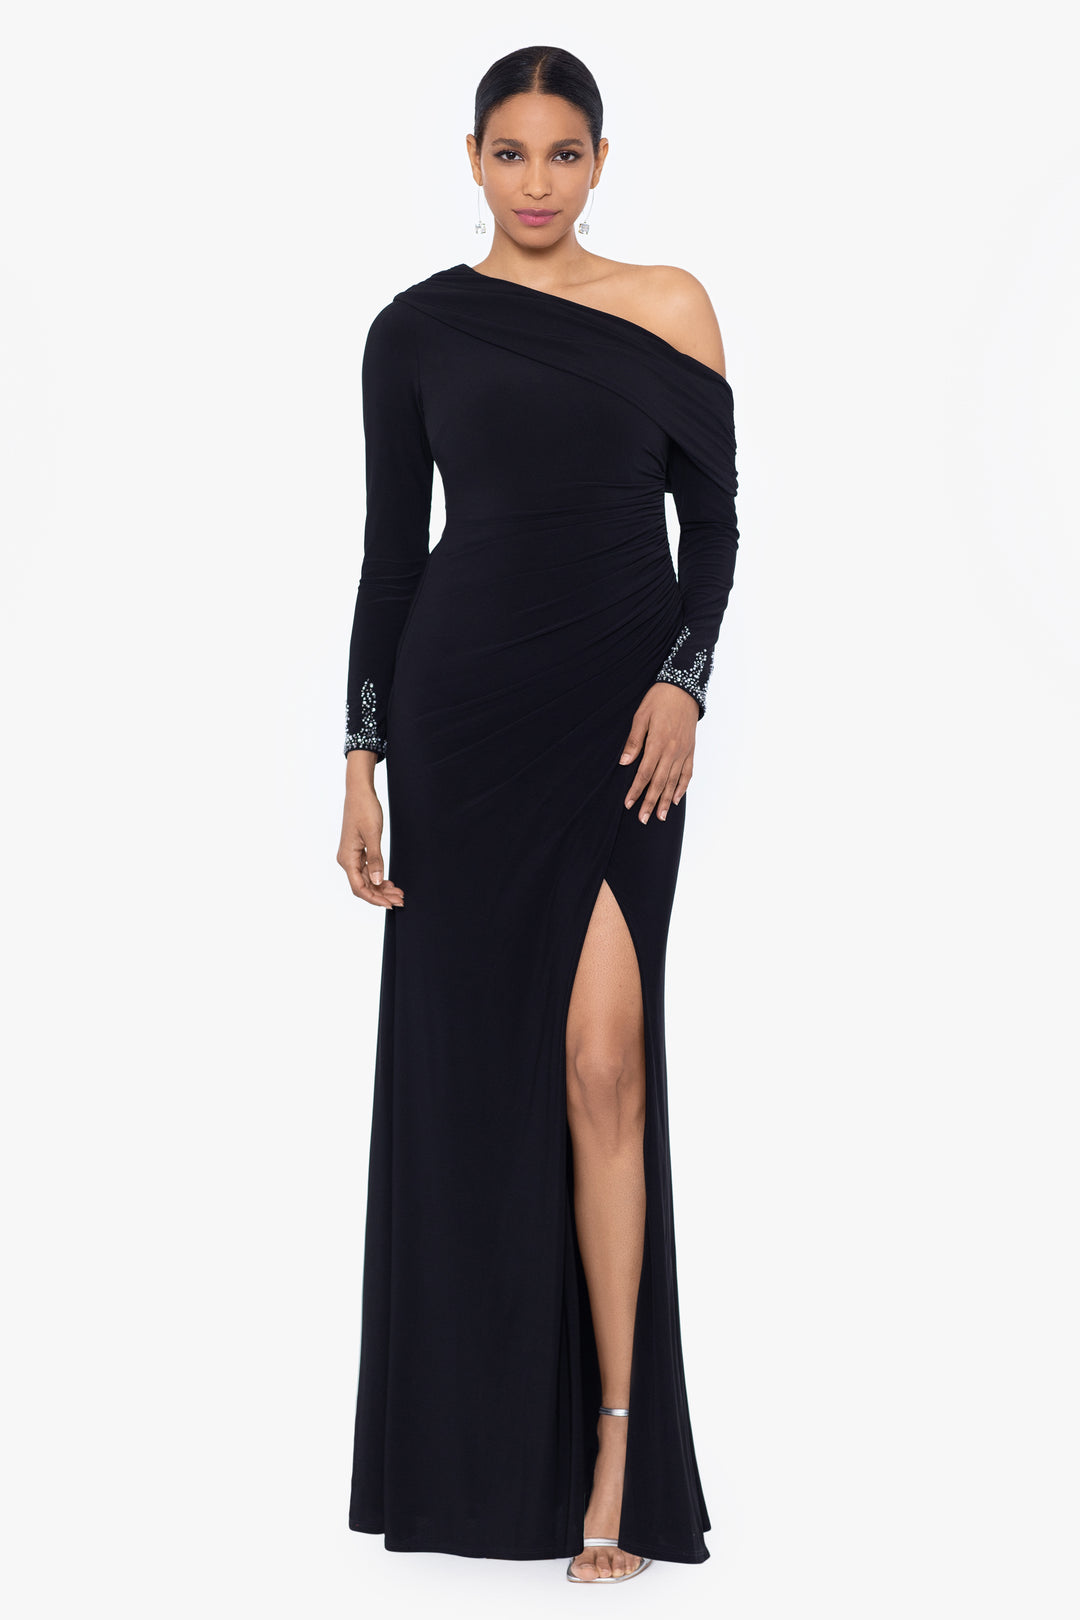 "Chrishell" Long Jersey Knit Off the Shoulder Overlay with Beaded Sleeves